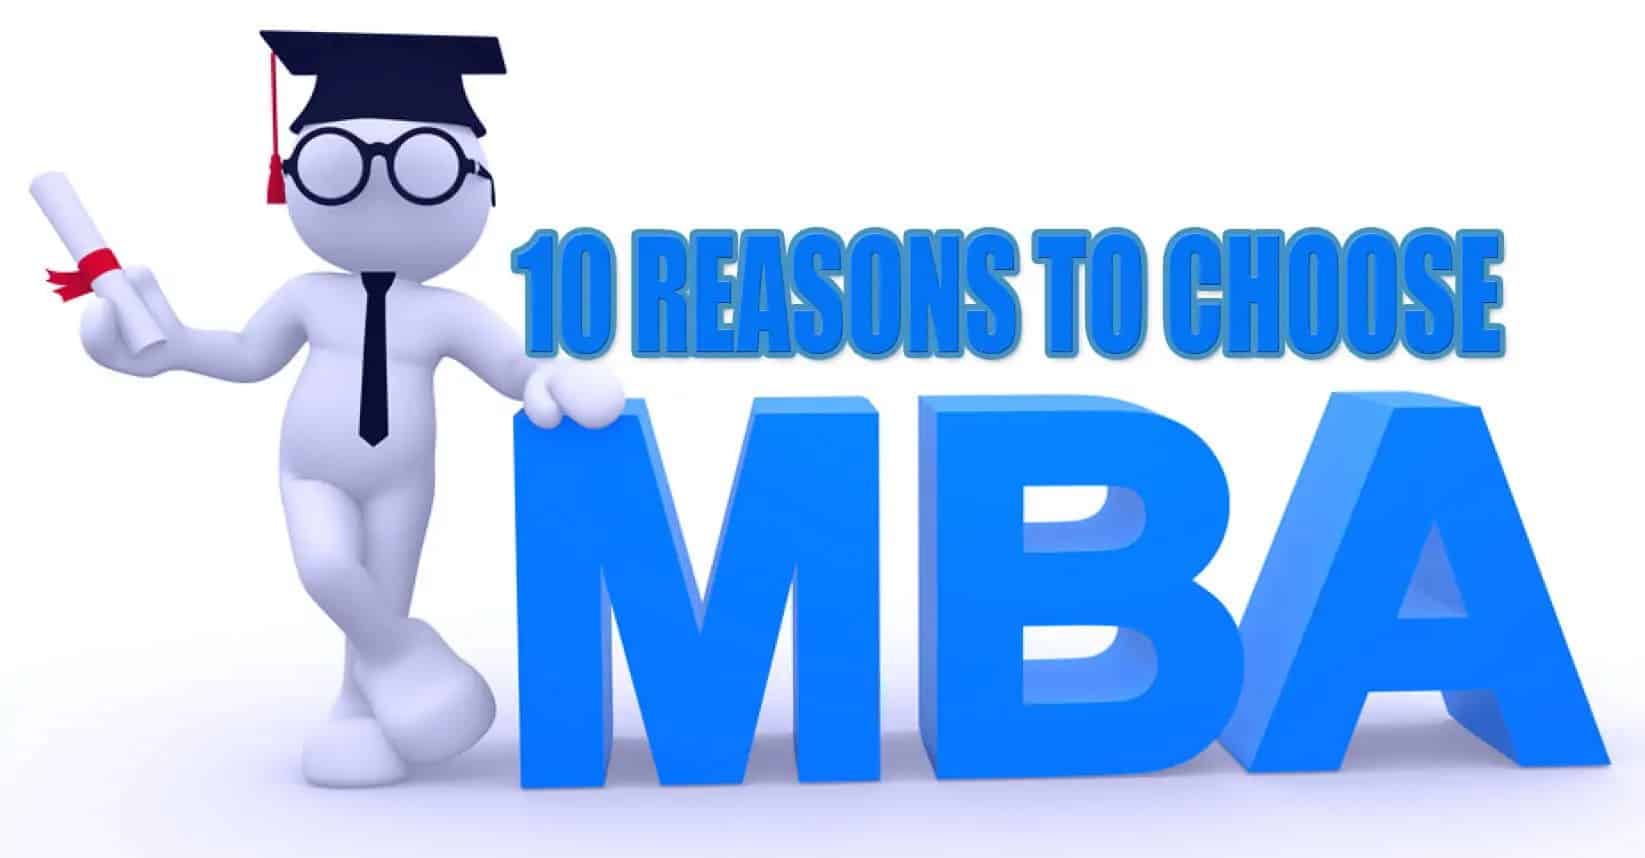 Top 10 Reasons to choose MBA 